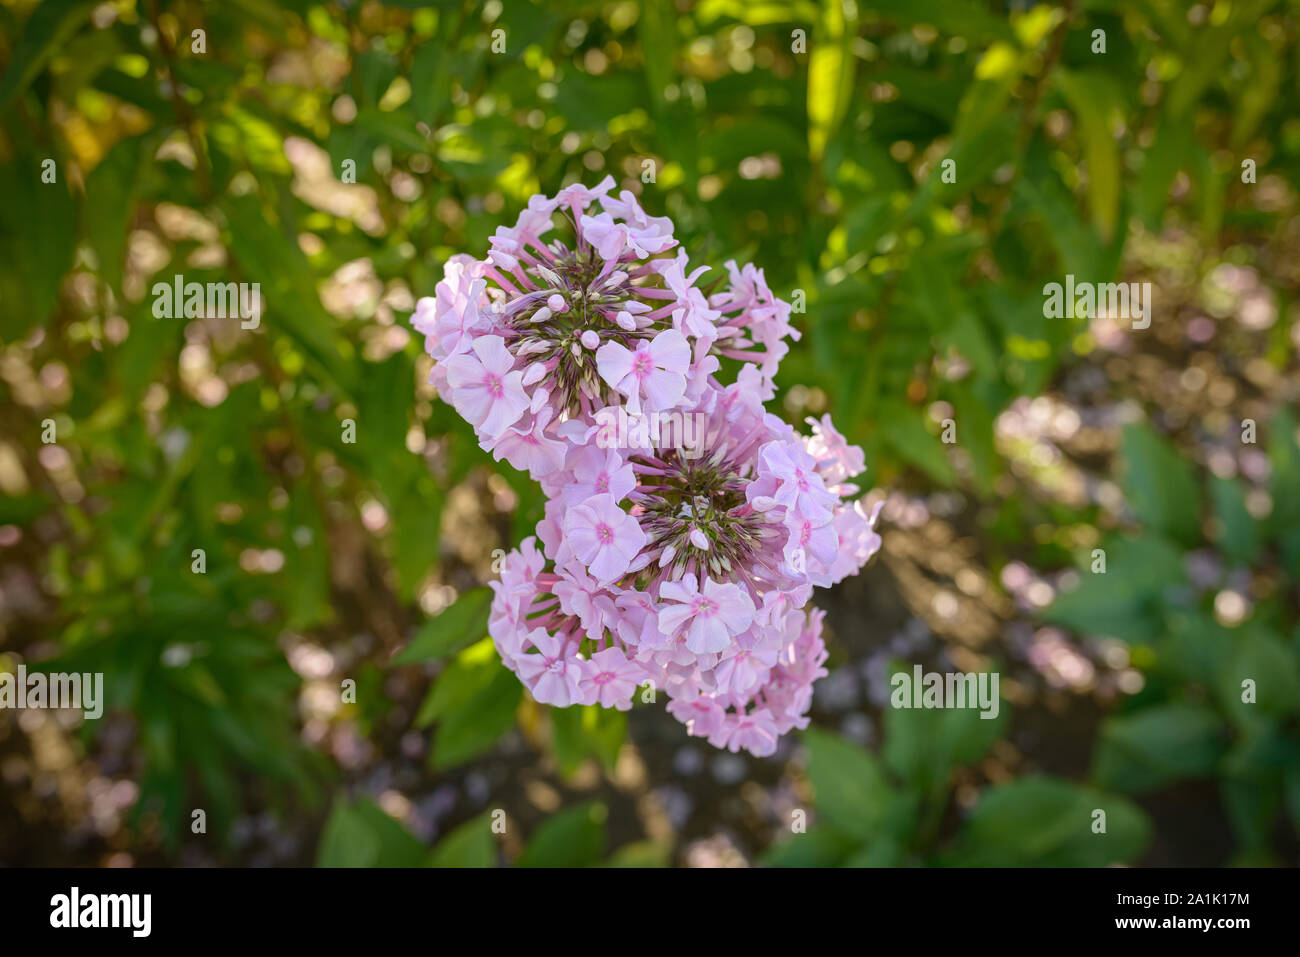 Pink flowers of phlox in the garden. Stock Photo